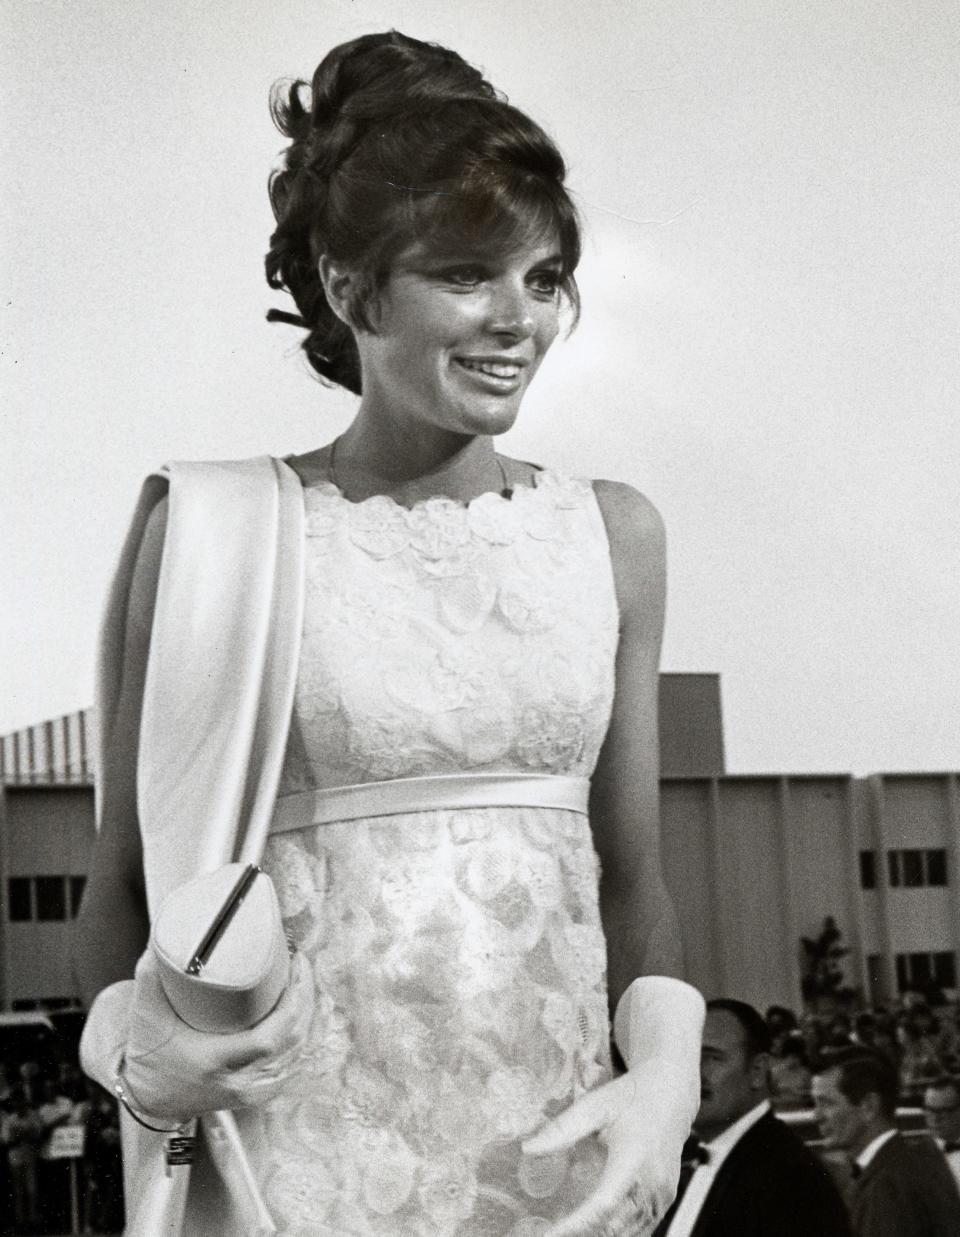 Beyond Old Hollywood Glamour: 27 Fabulous Red Carpet Outfits From the Early Academy Awards